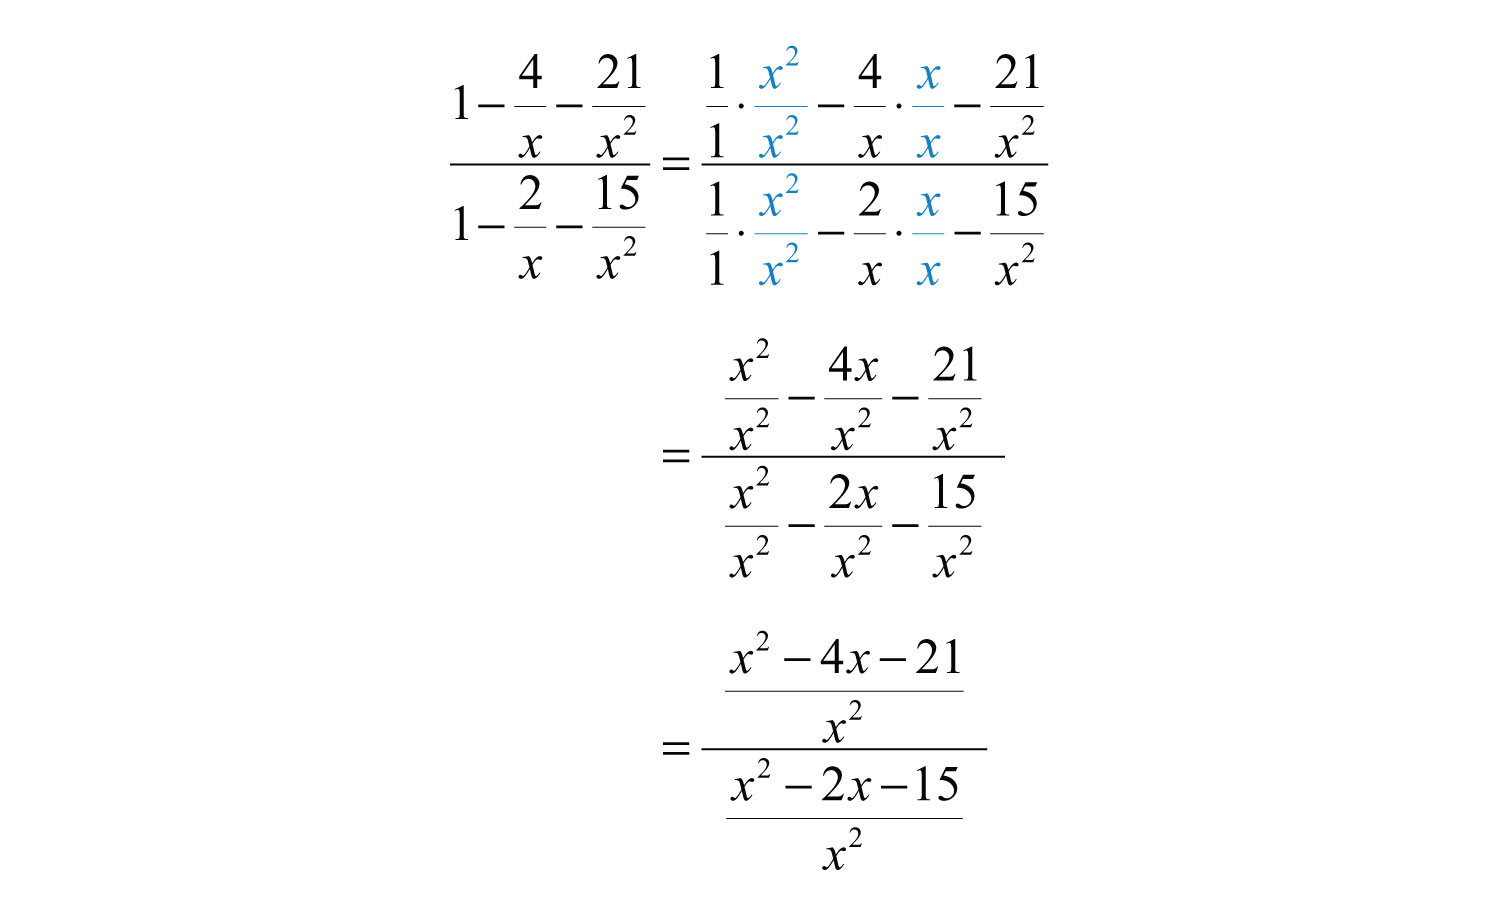 Addition And Subtraction Of Rational Algebraic Expressions Worksheets